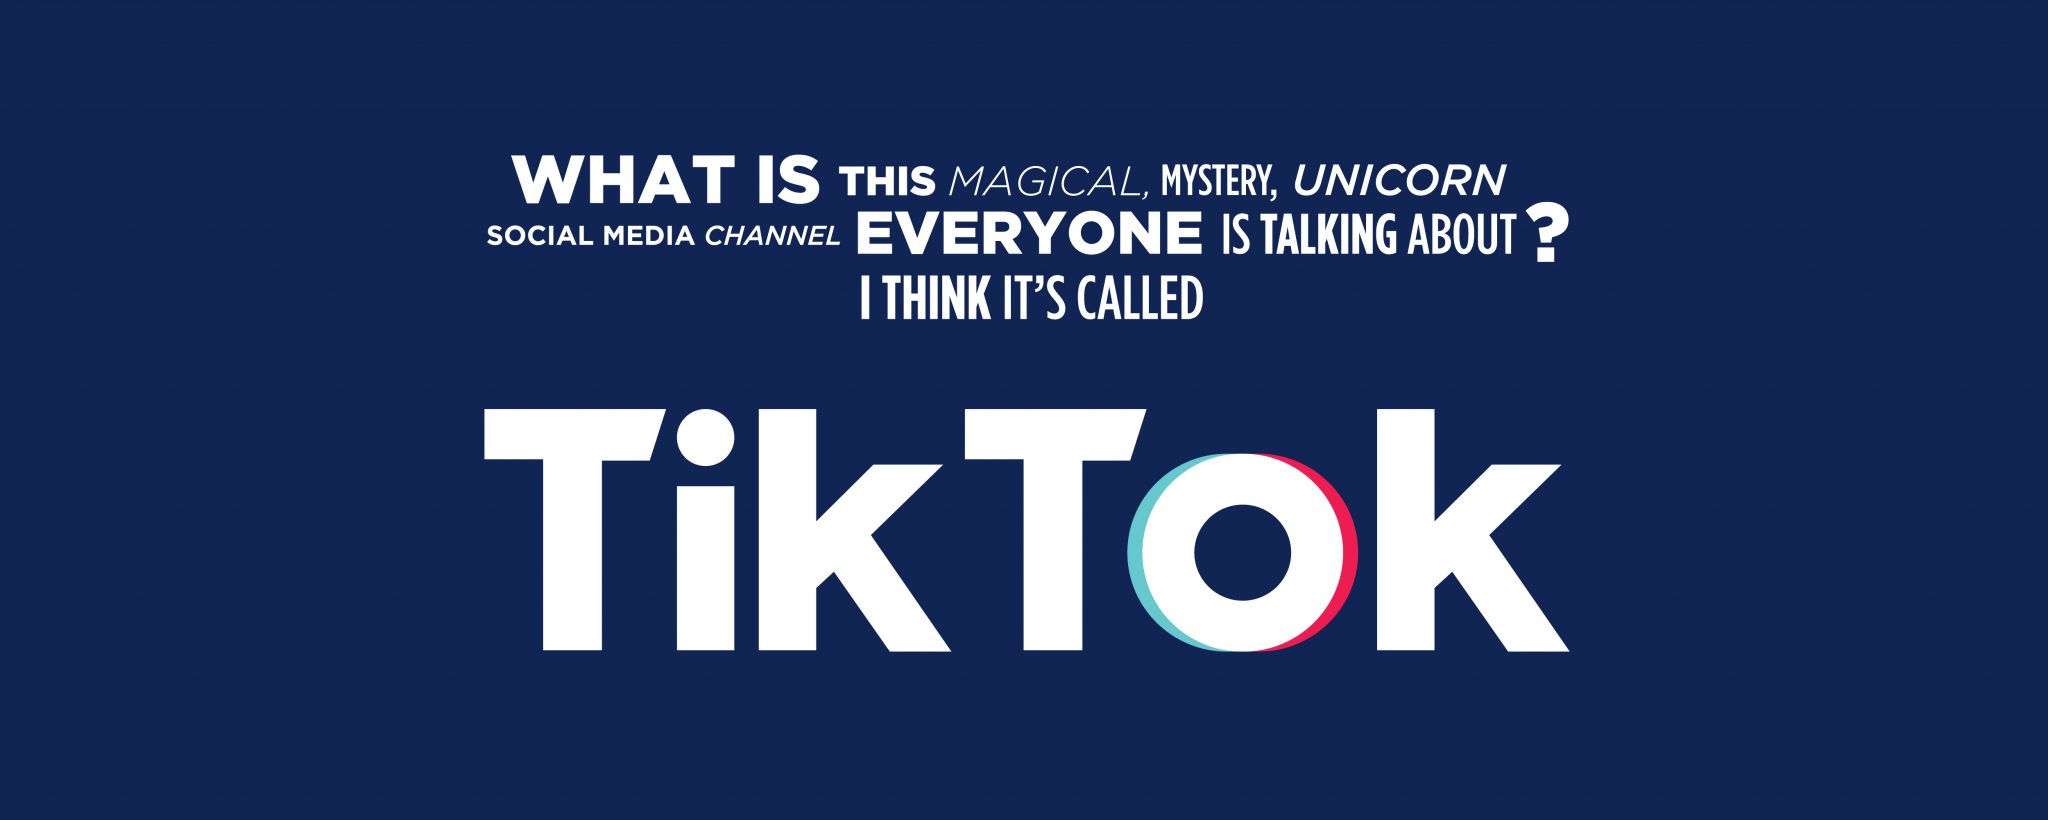 A graphic with a navy back ground and white text that reads, "What is this magical, mystery, unicorn social media channel everyone is talking about? I think it's called TikTok."